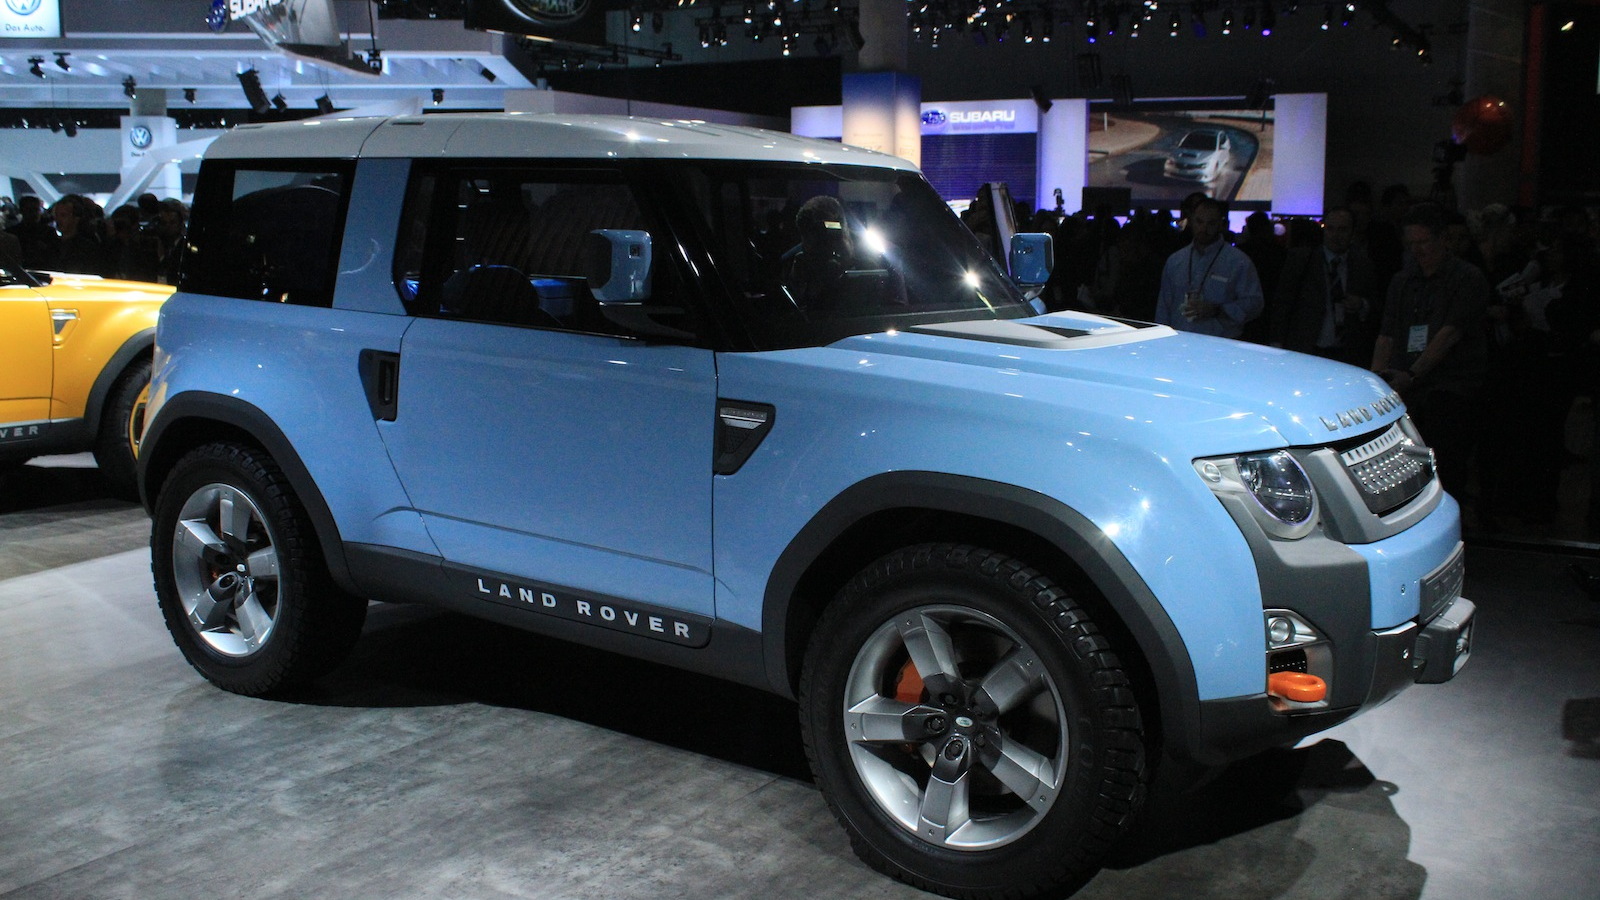 Land Rover DC100 (revised) concepts, live photos